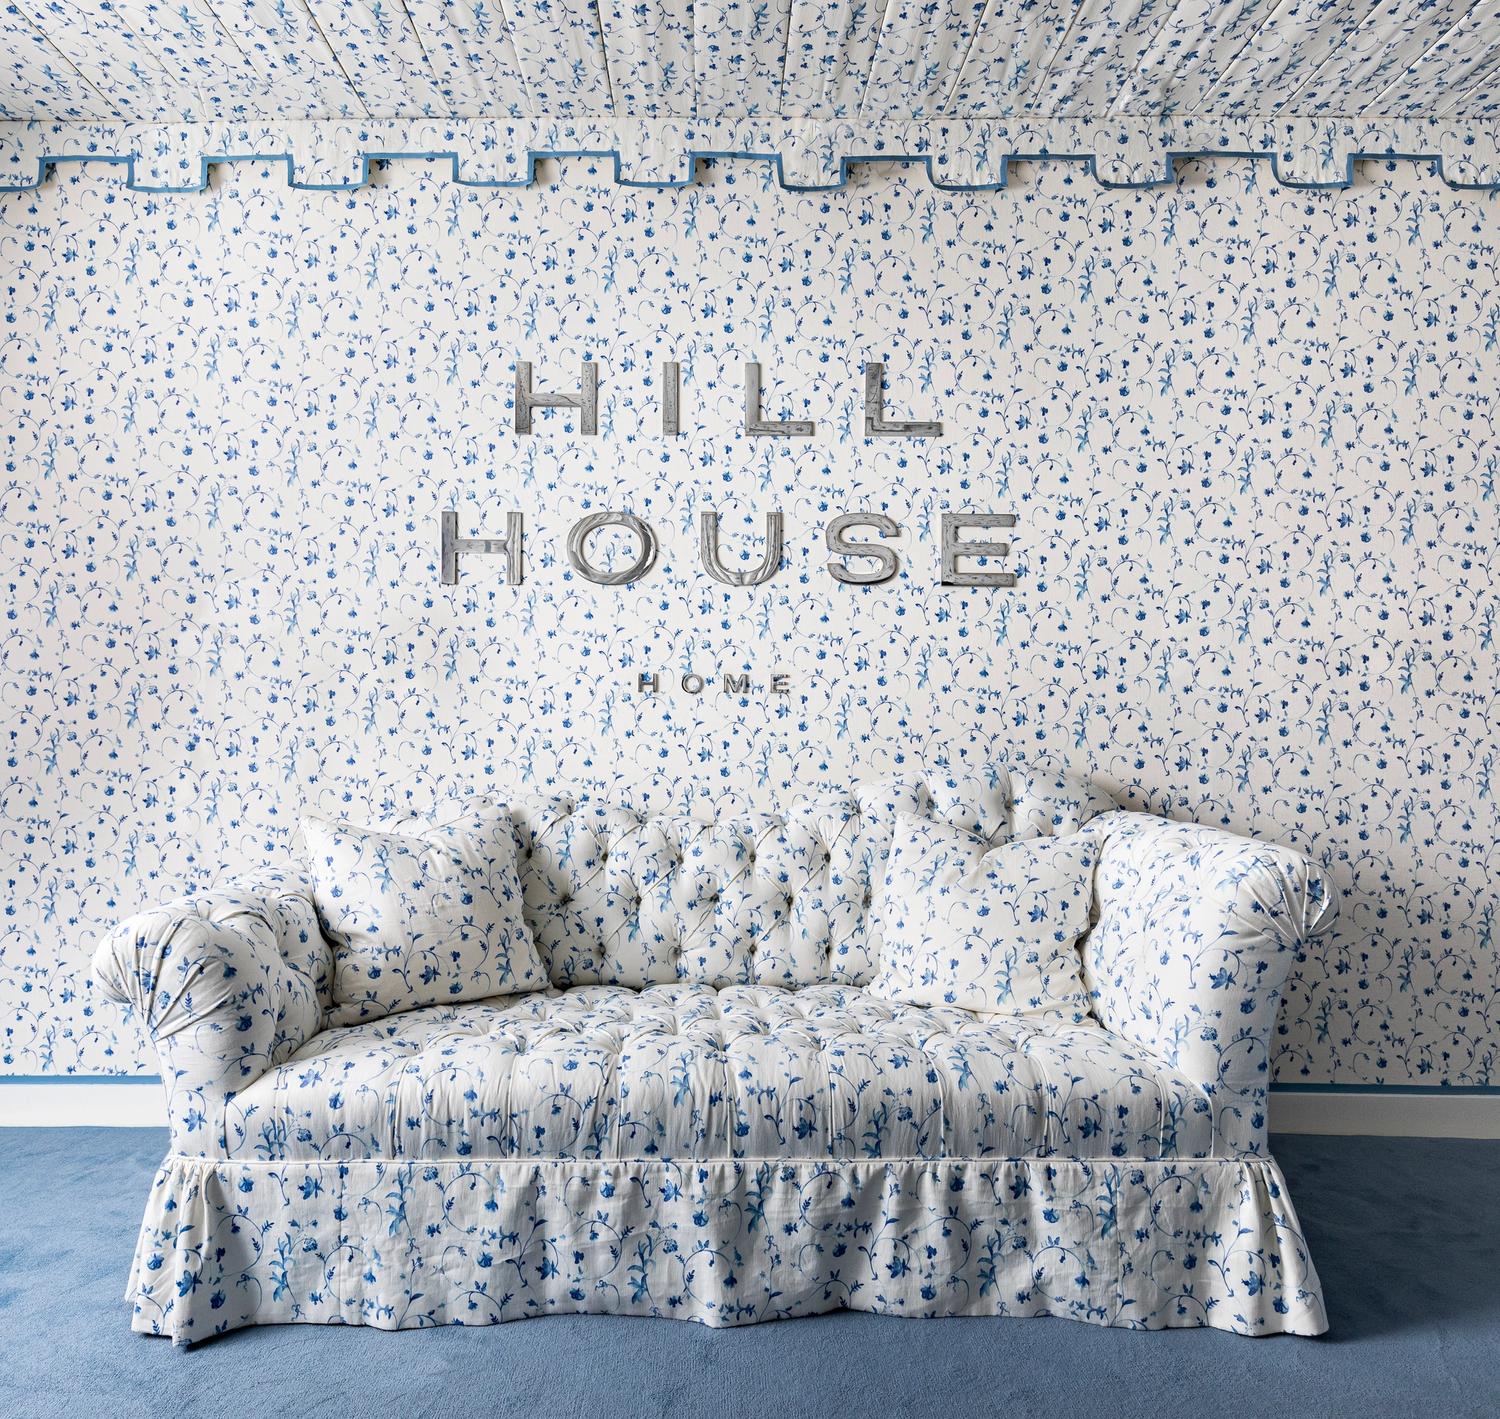 Patterned floral Hill House sofa and wallpaper